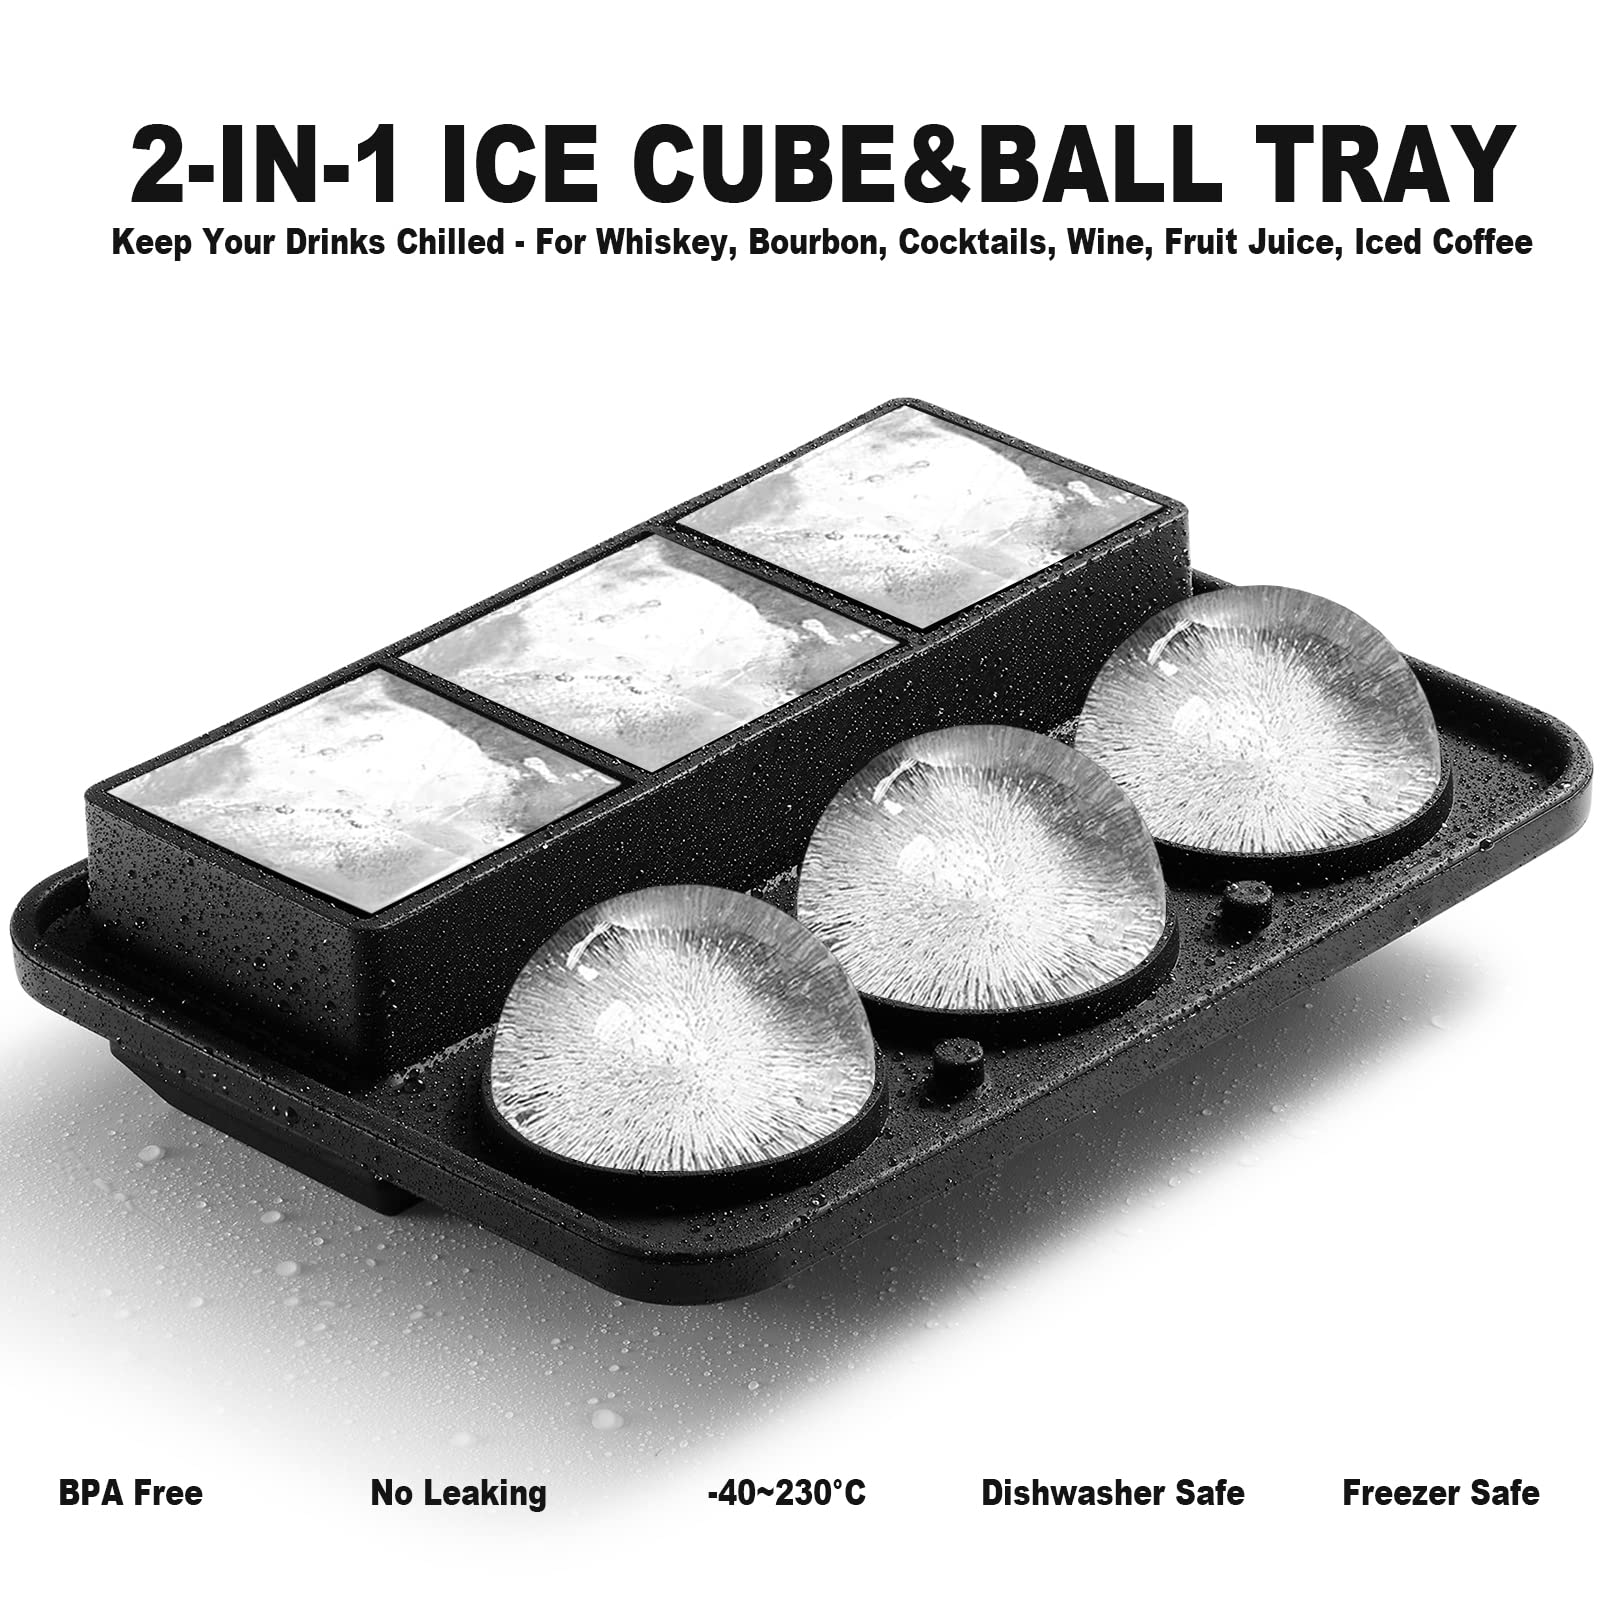 Nax Caki Ice Cube Molds Tray, Large Silicone Whiskey Ice Mold,2-in